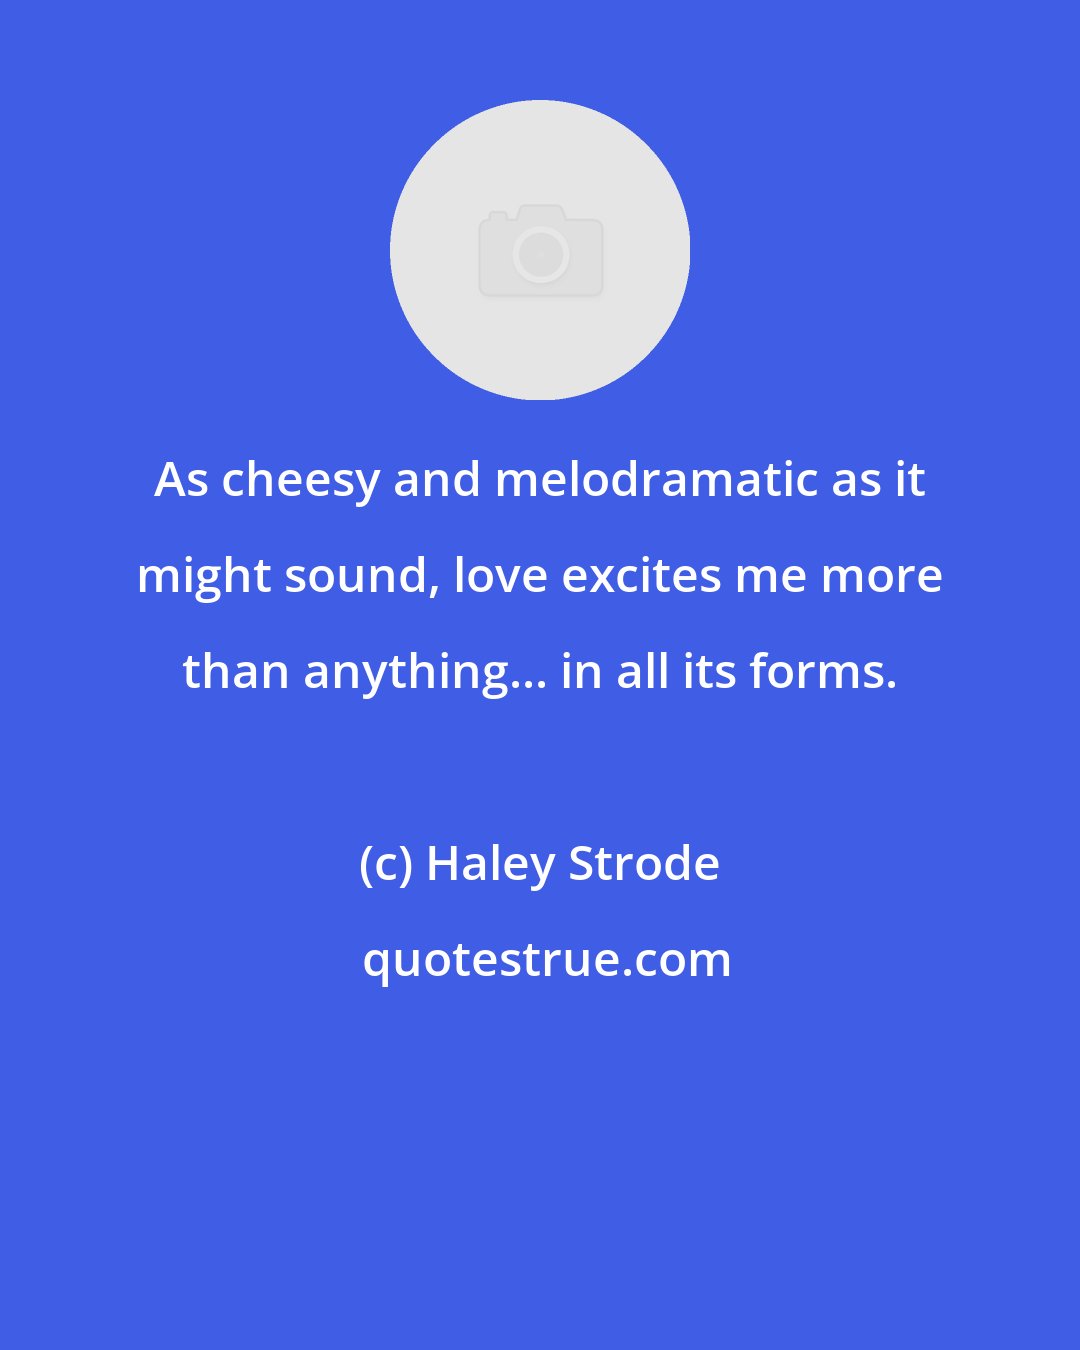 Haley Strode: As cheesy and melodramatic as it might sound, love excites me more than anything... in all its forms.